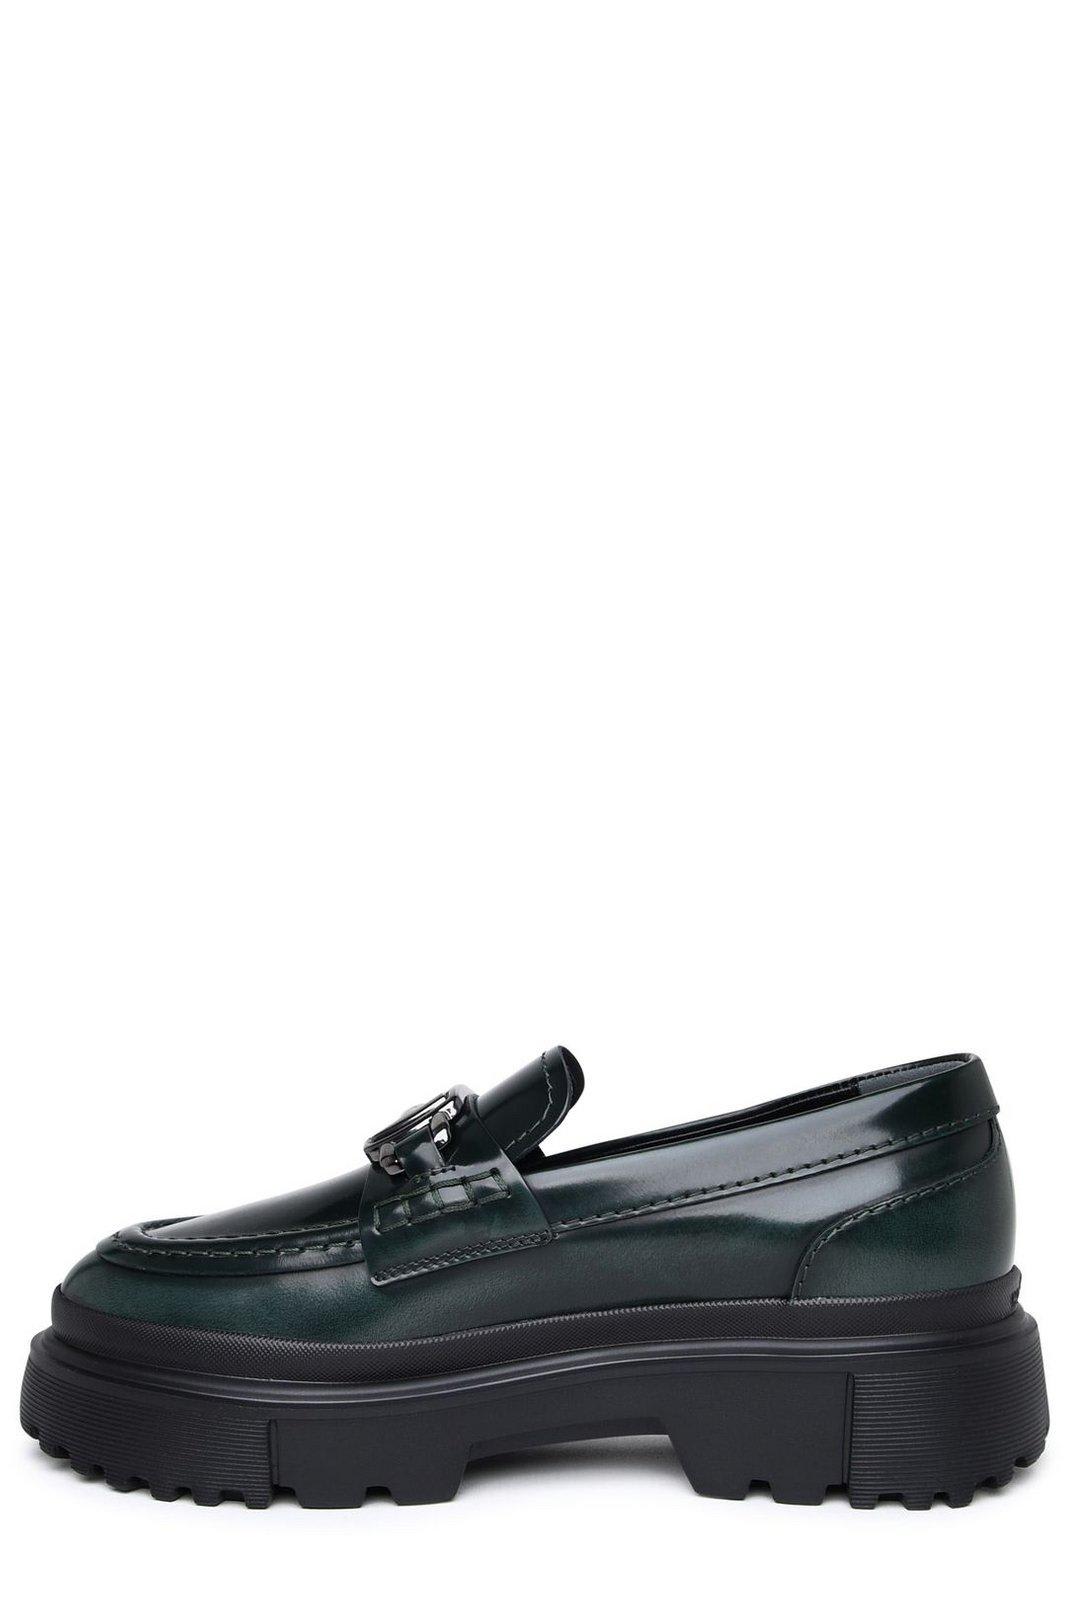 Shop Hogan H629 Slip-on Loafers In Green